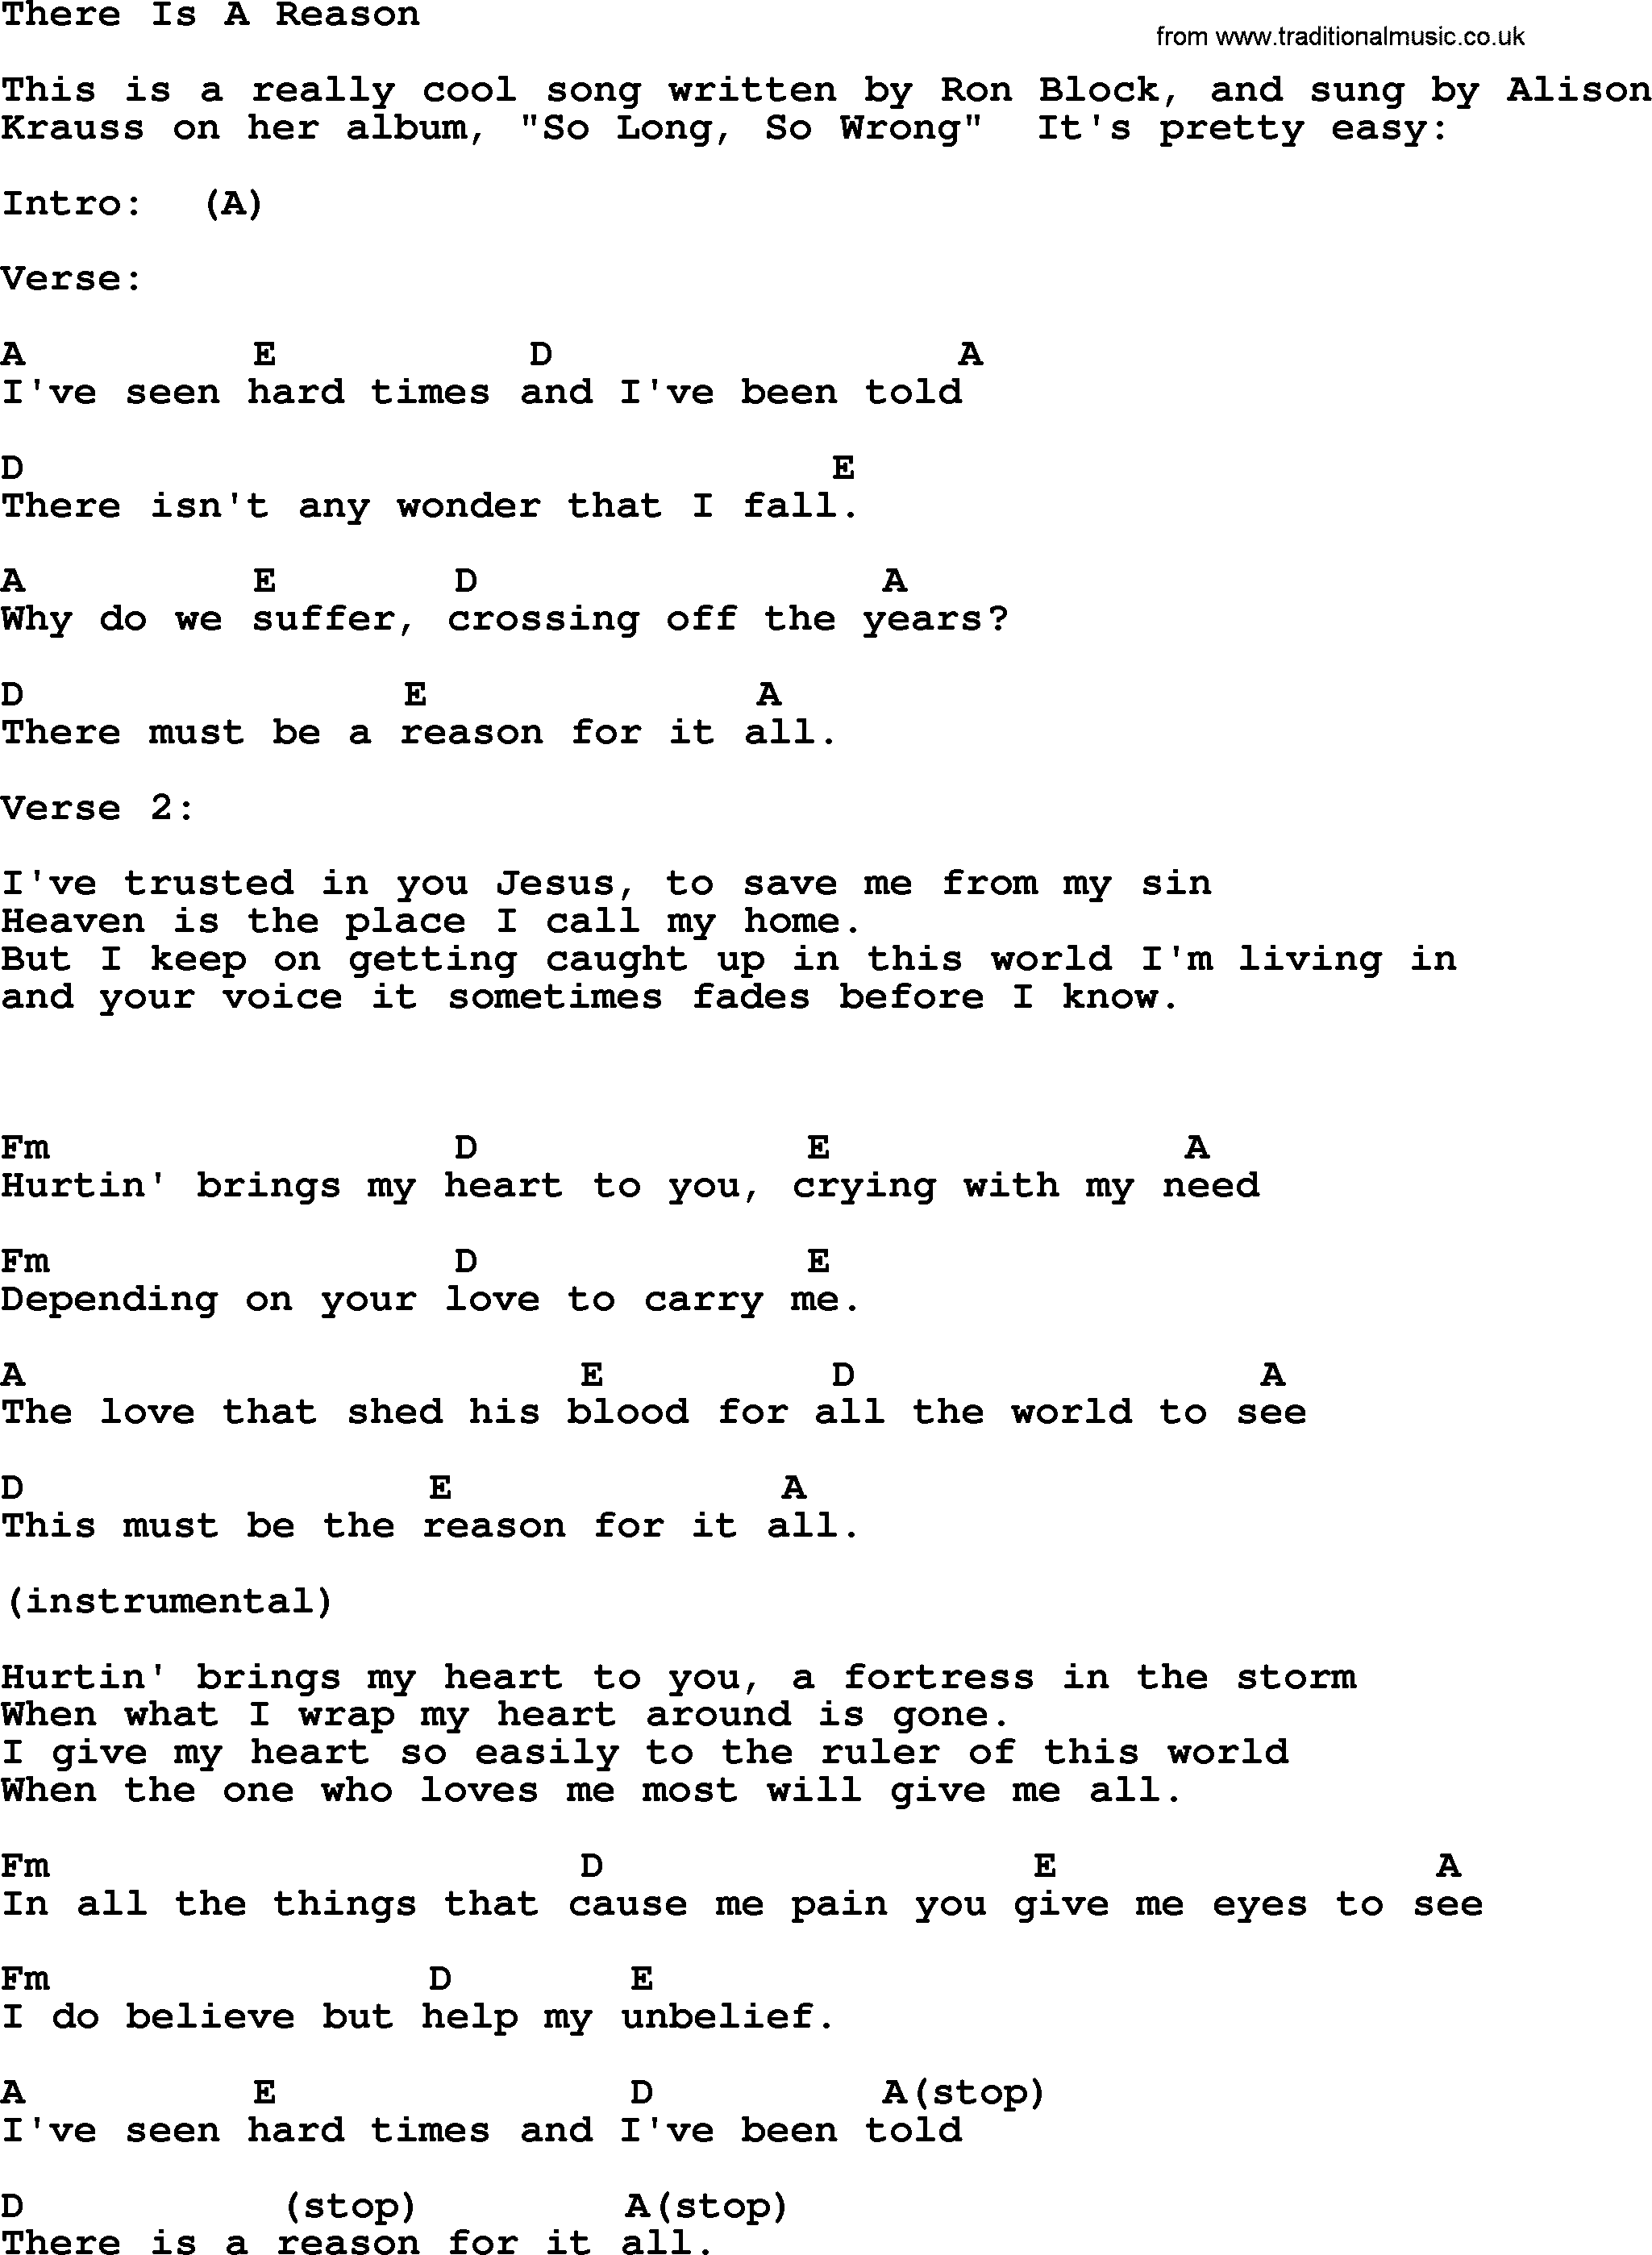 Bluegrass song: There Is A Reason, lyrics and chords